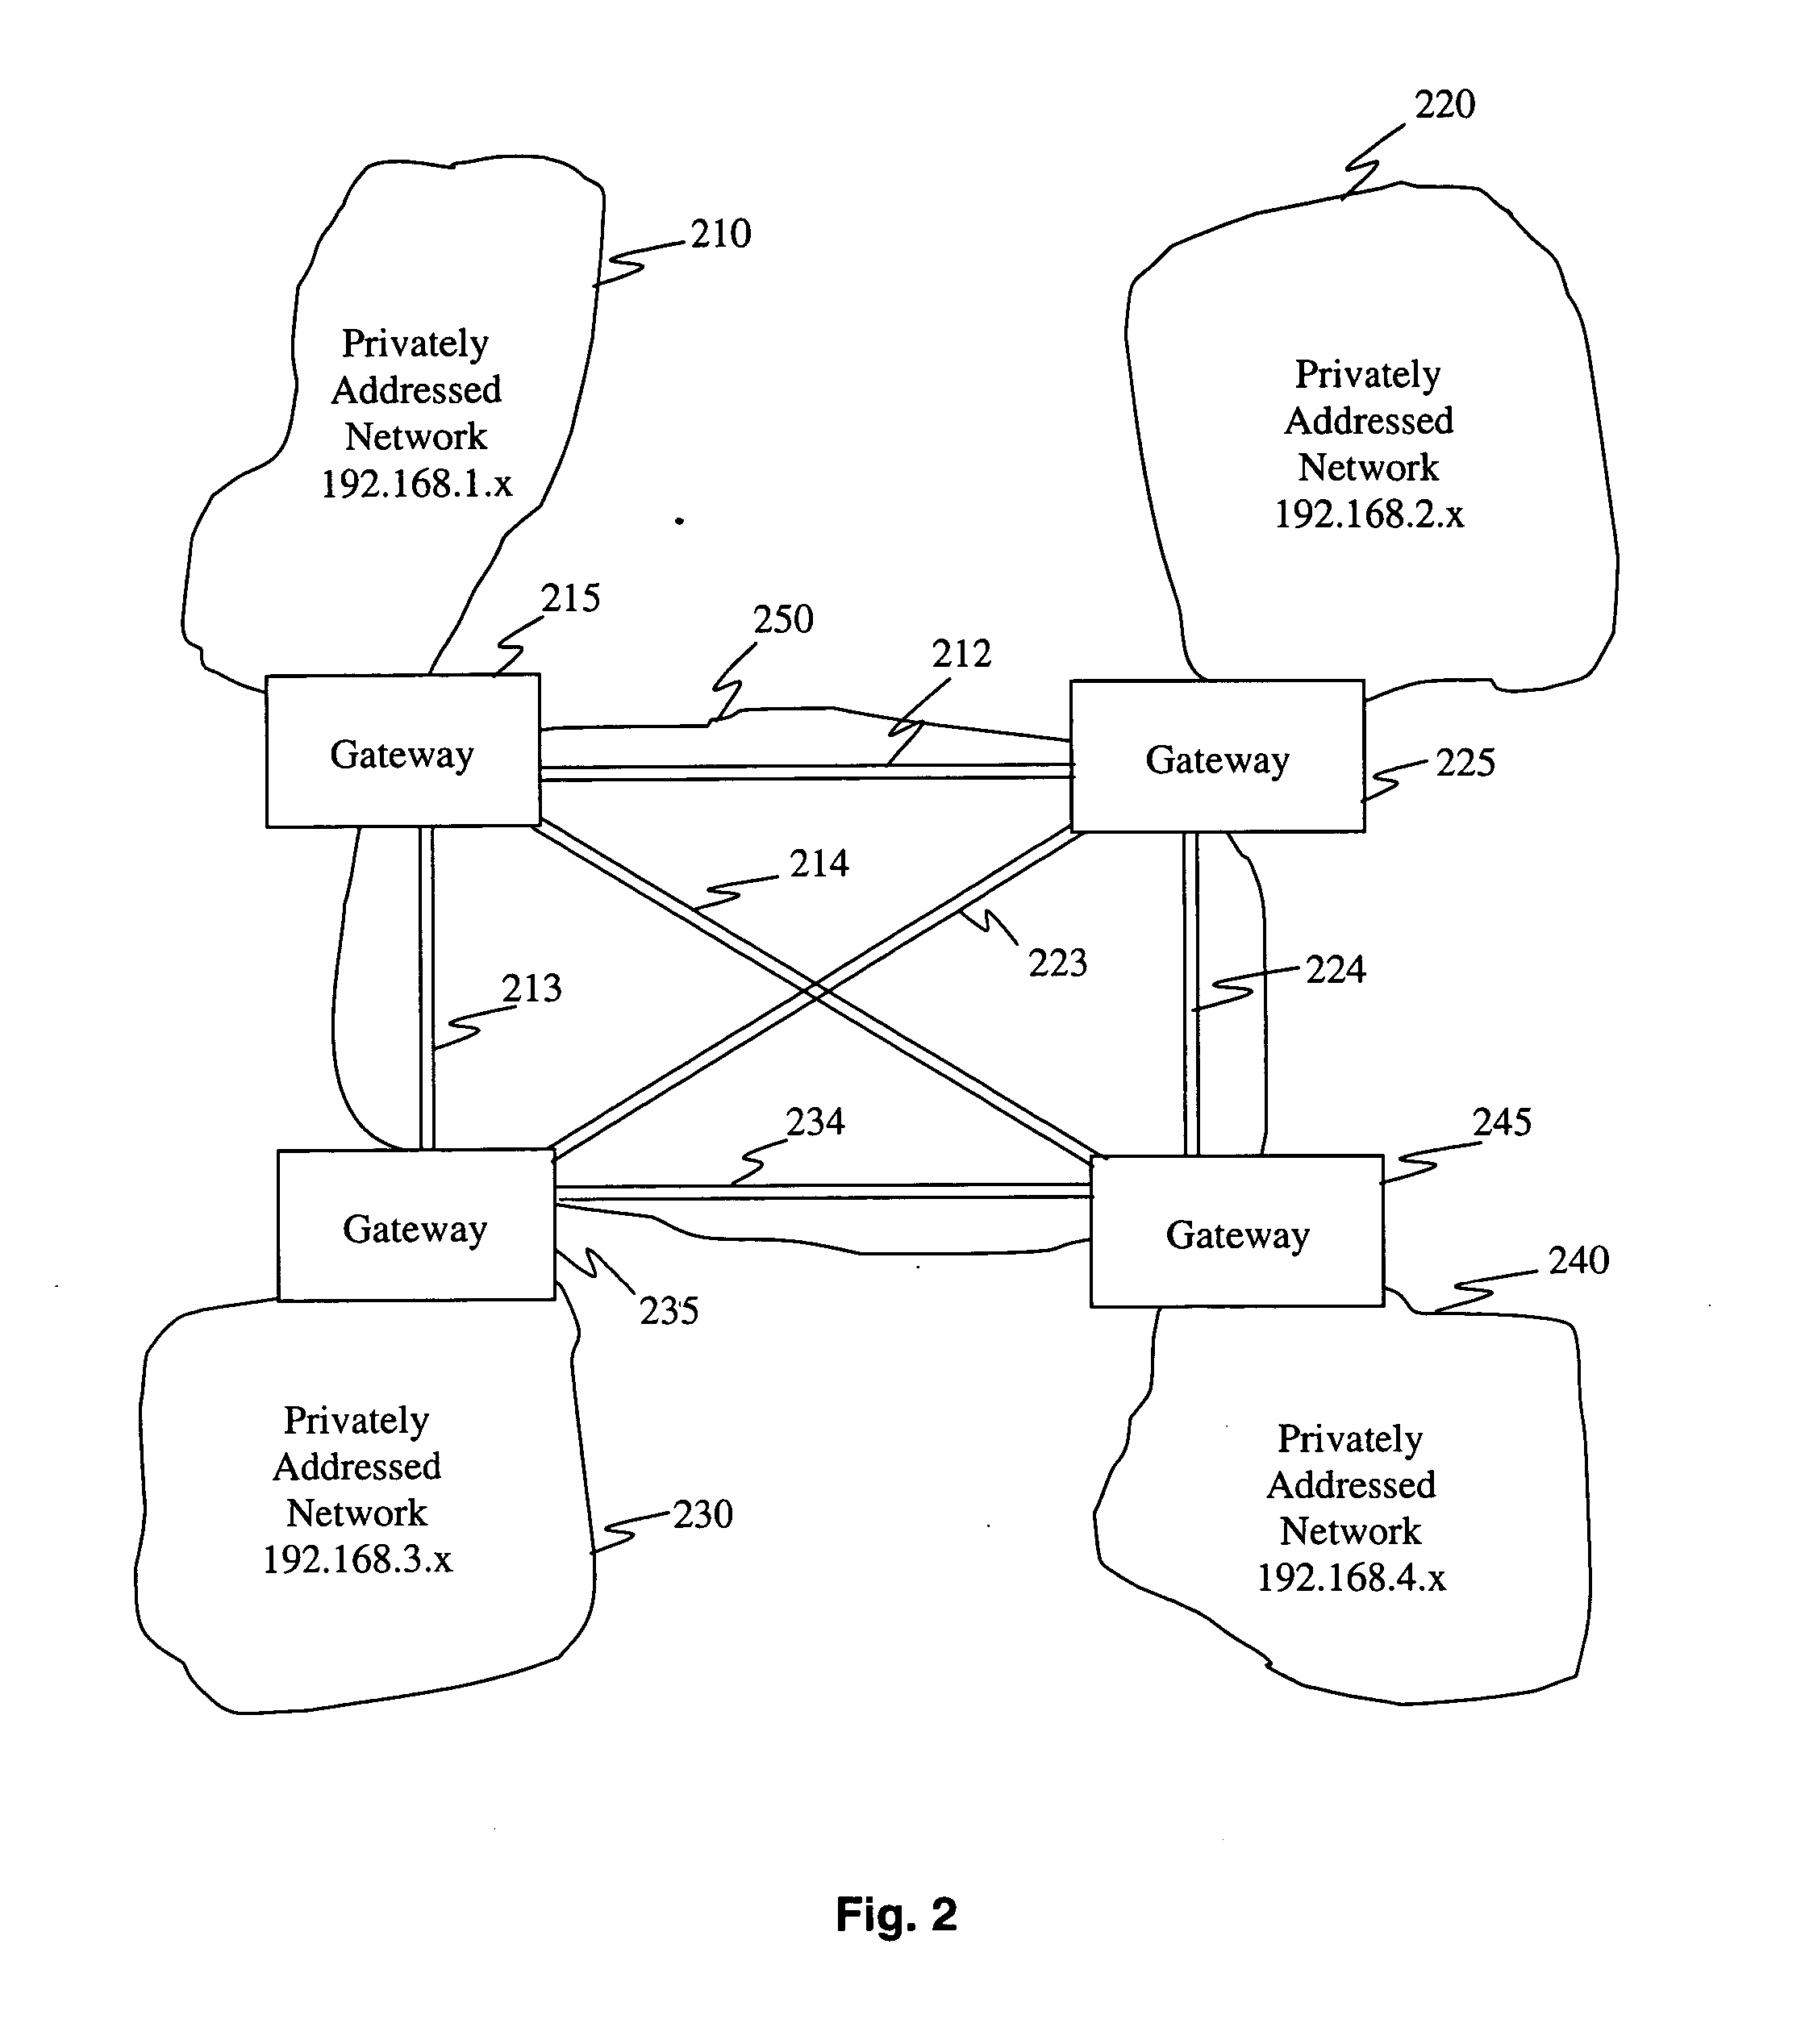 Method and apparatus for connecting privately addressed networks